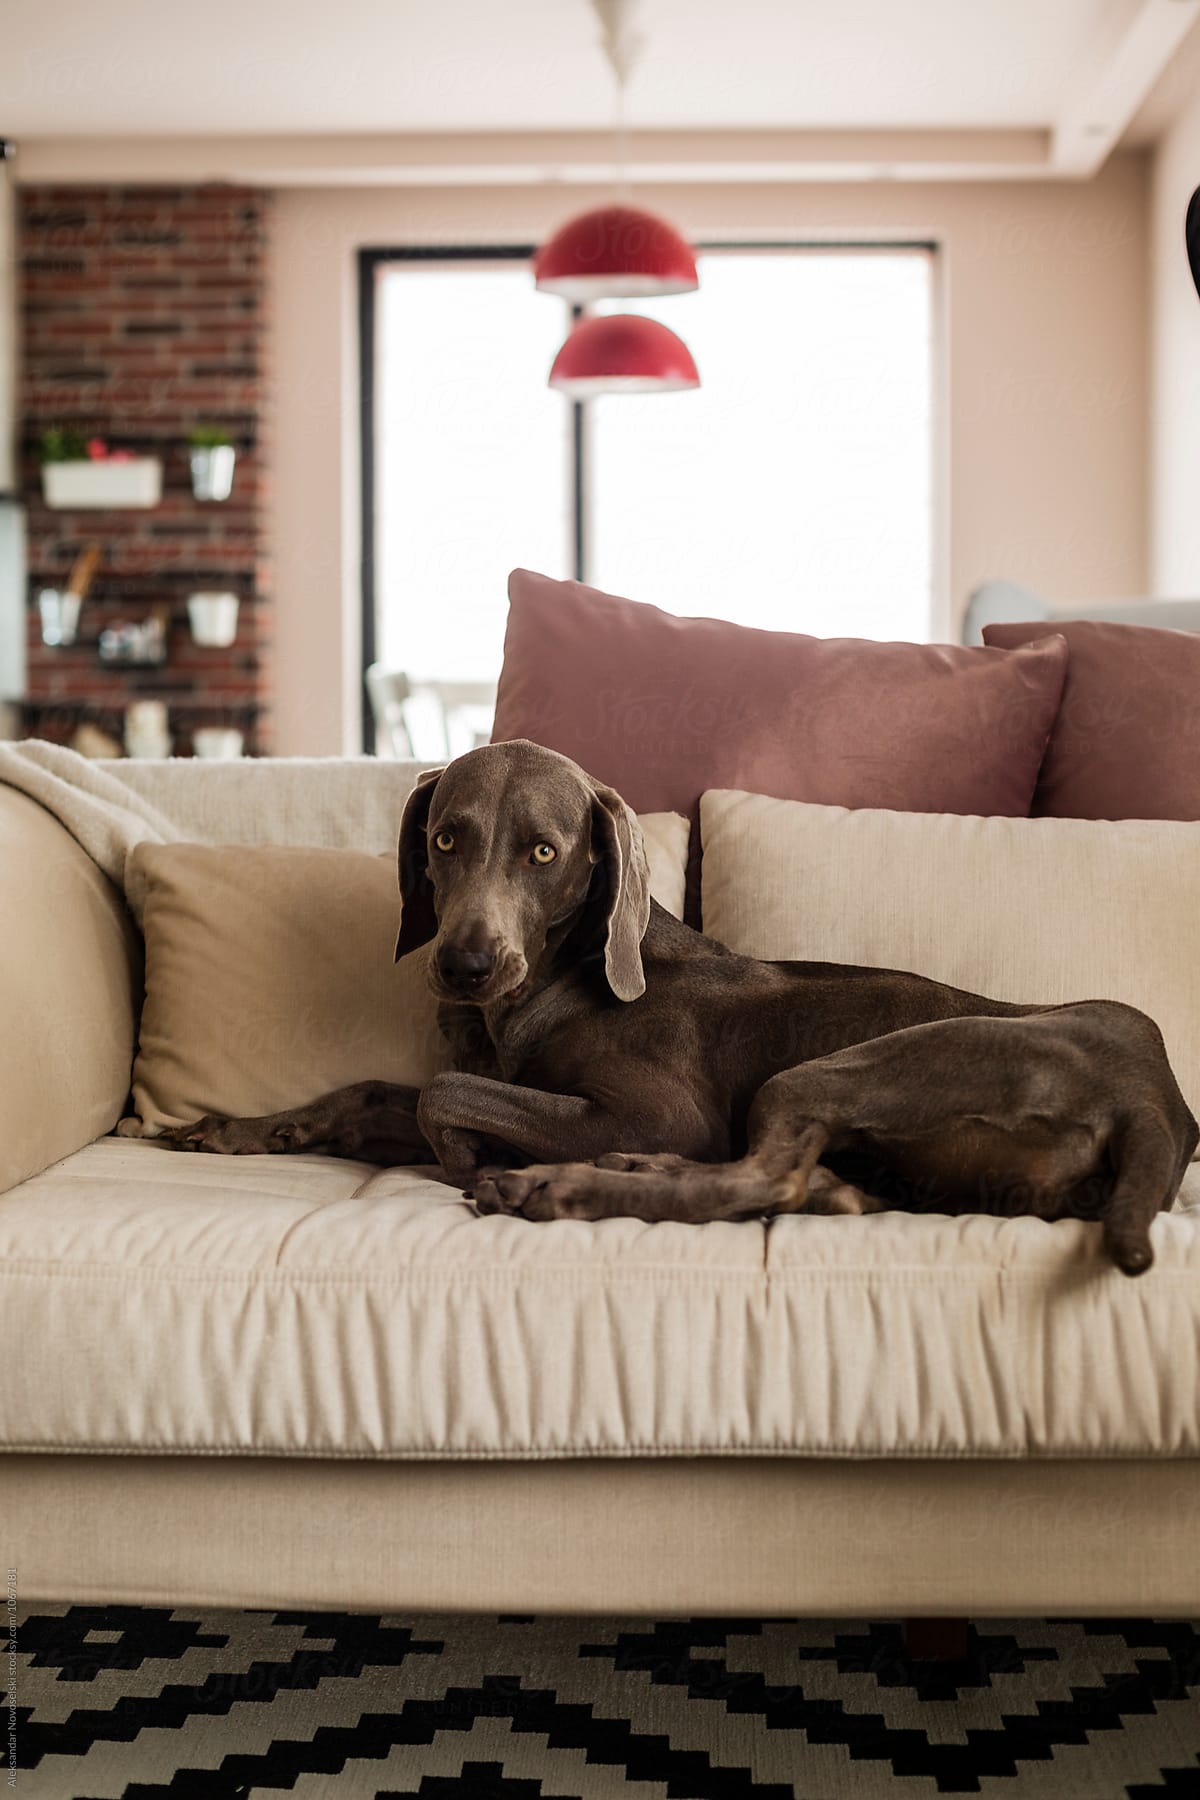 Dog lying on sofa in contemporary interior